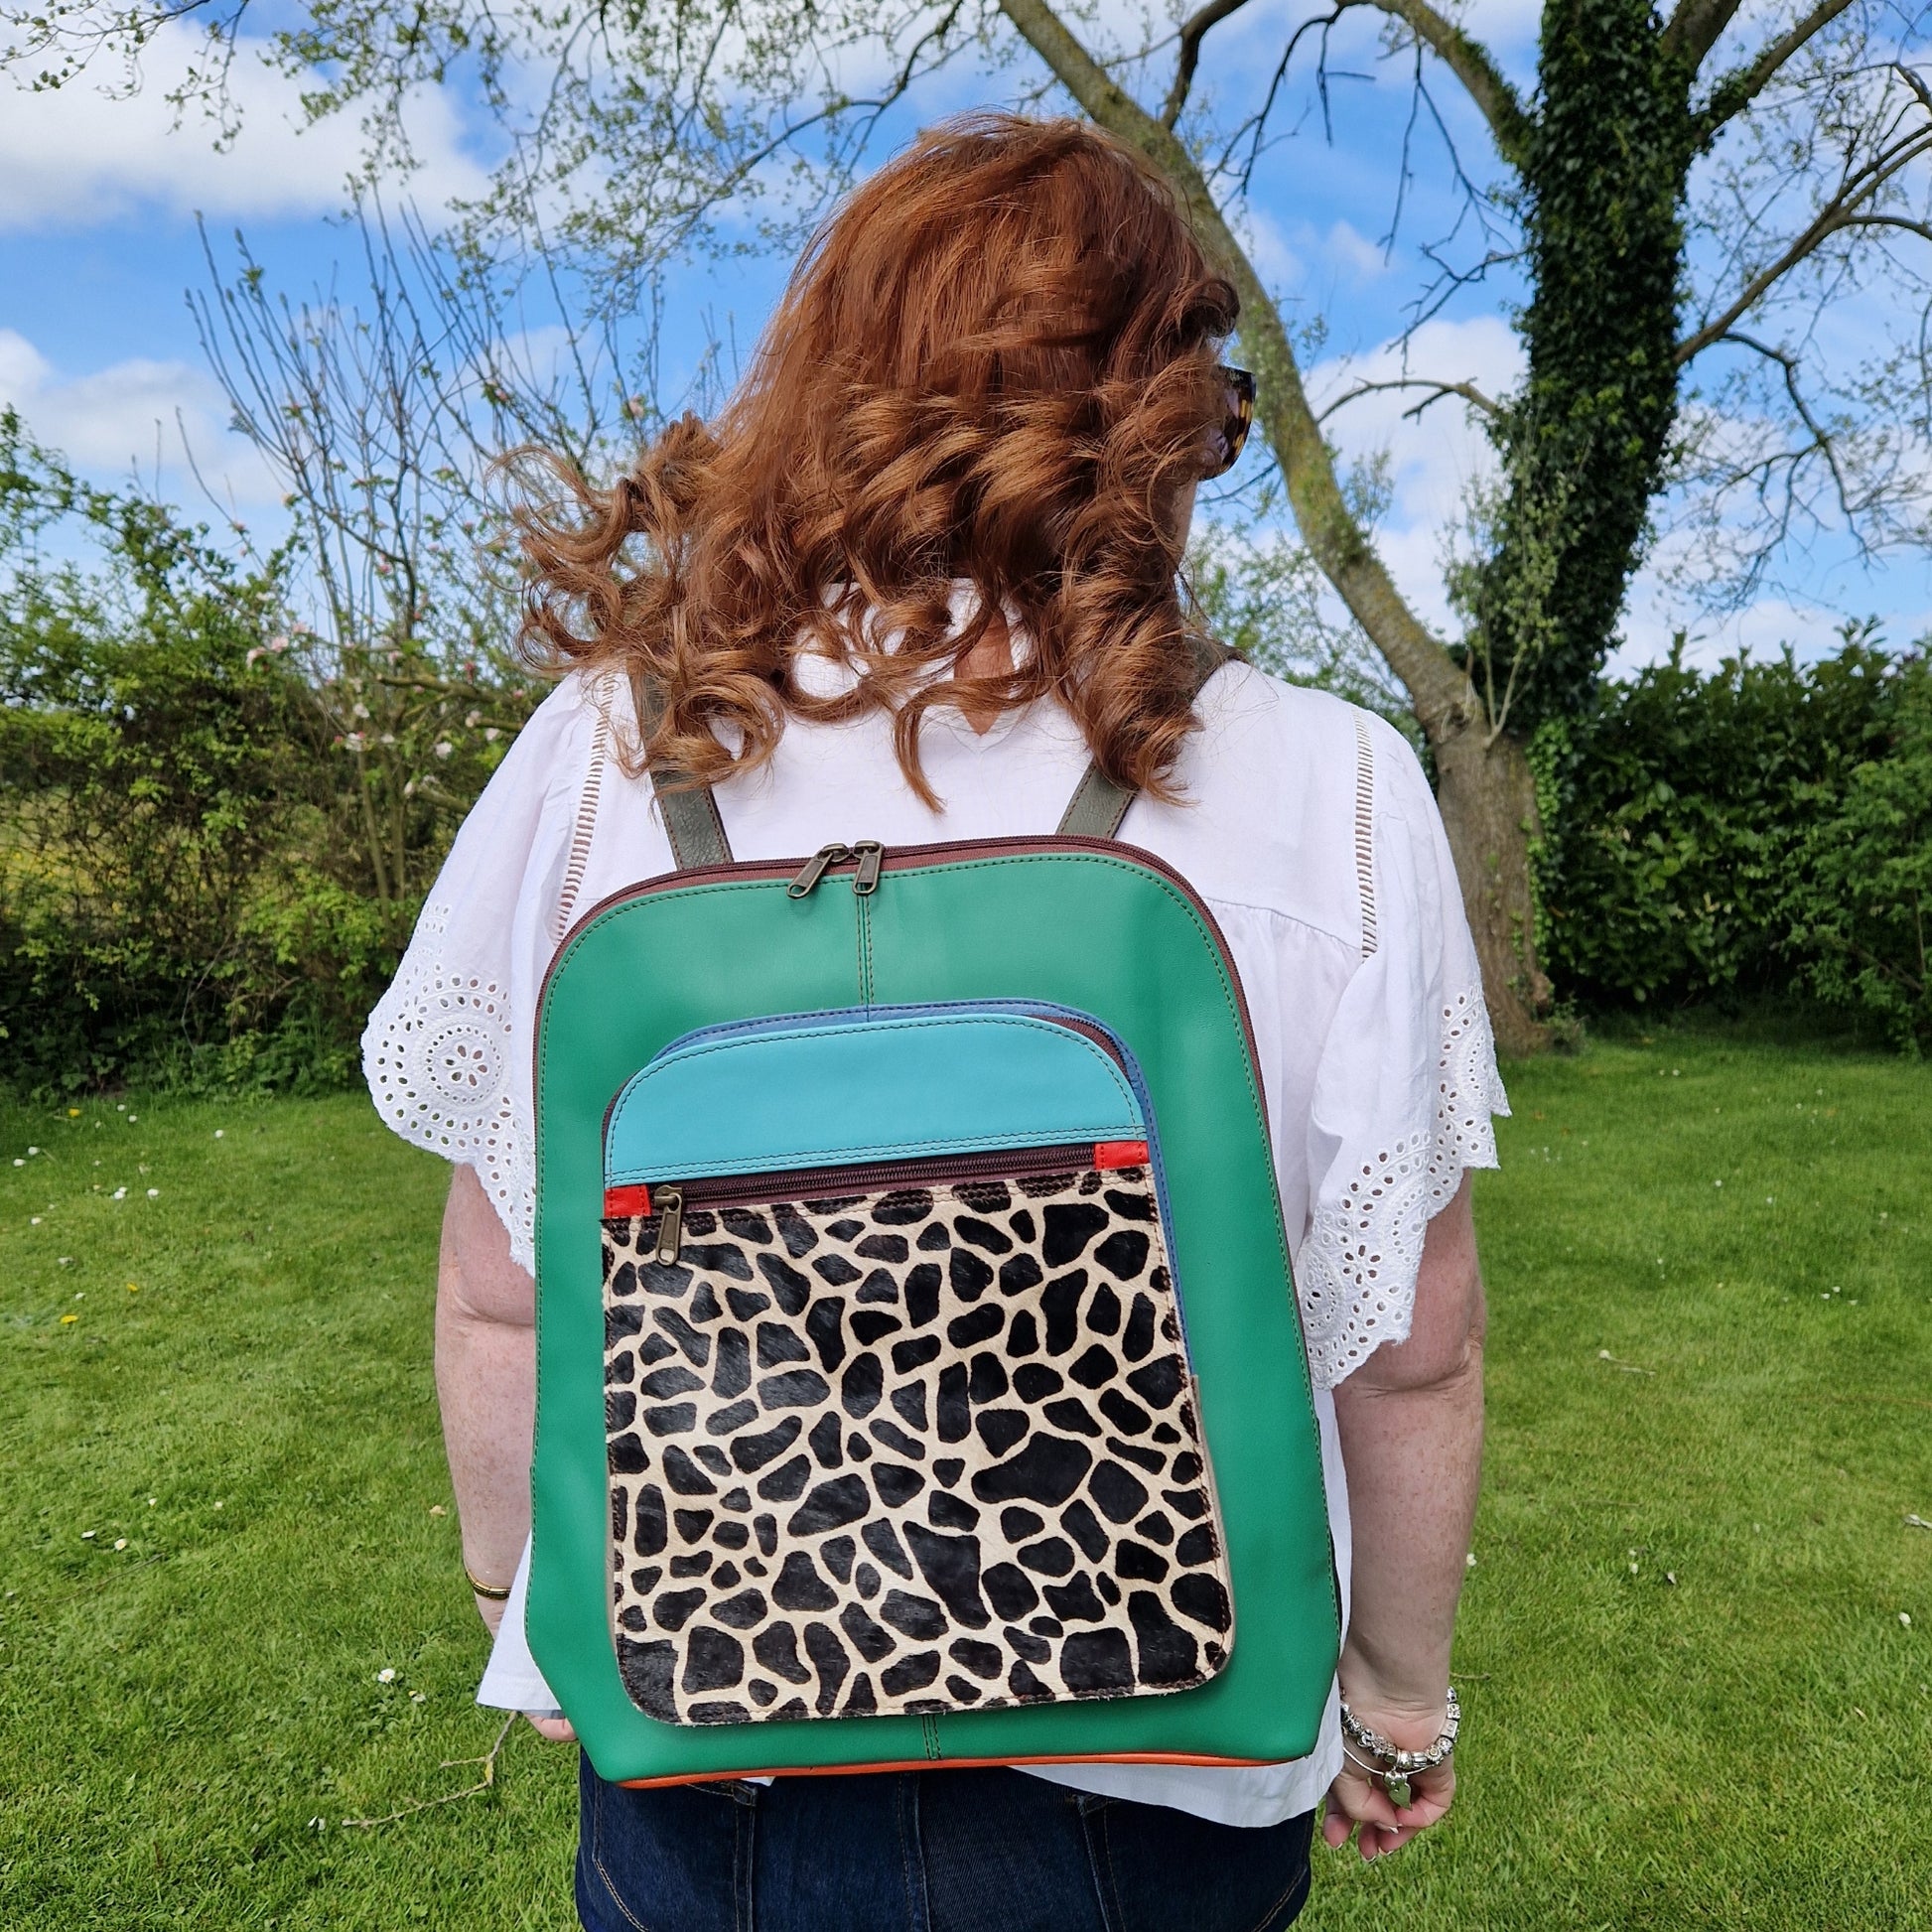 Lady wearing a green leather back pack with a giraffe print panel.